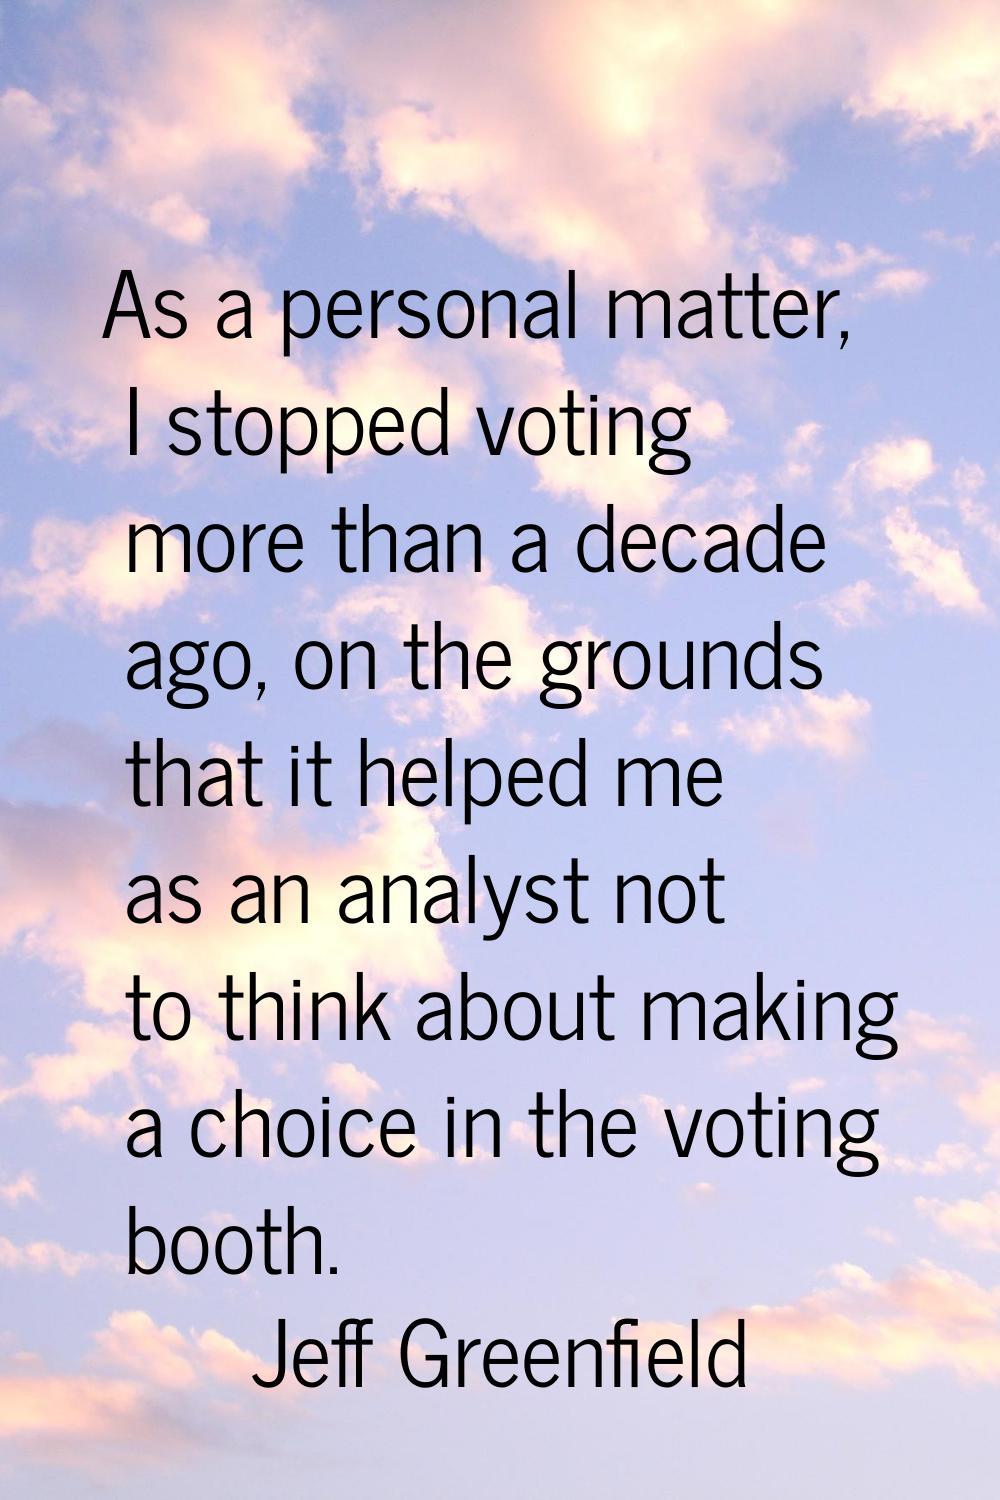 As a personal matter, I stopped voting more than a decade ago, on the grounds that it helped me as 